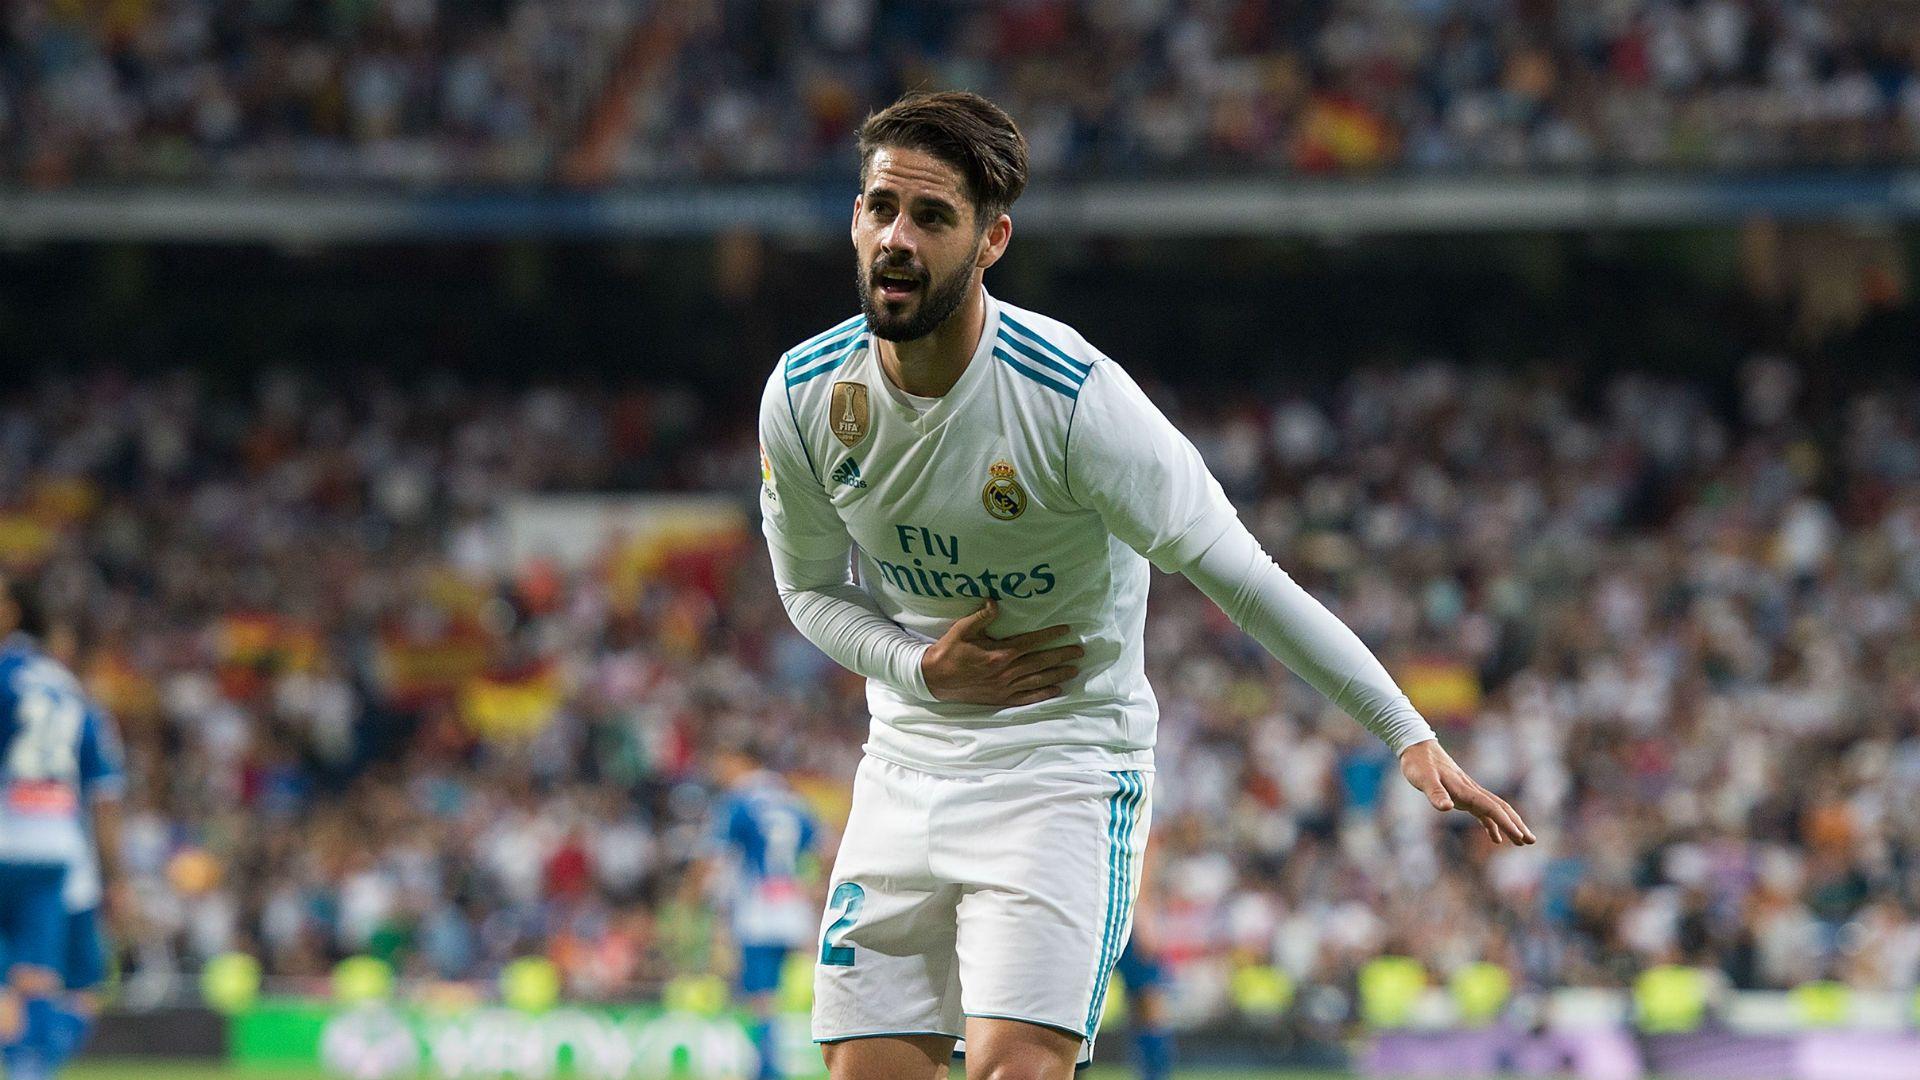 Real Madrid 2 Espanyol 0: Isco double secures first LaLiga home win